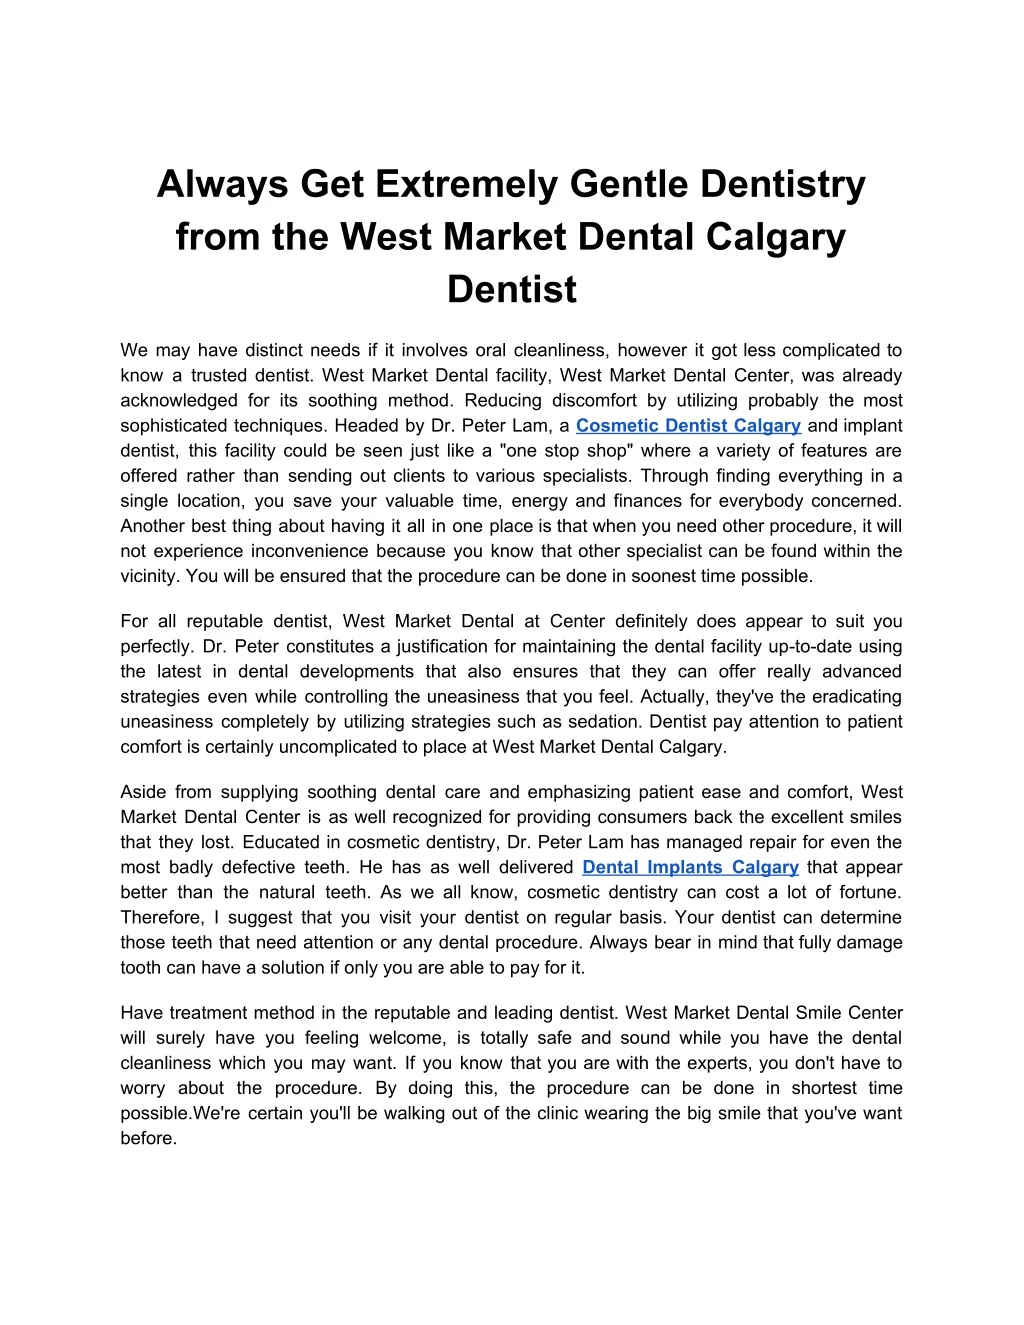 always get extremely gentle dentistry from